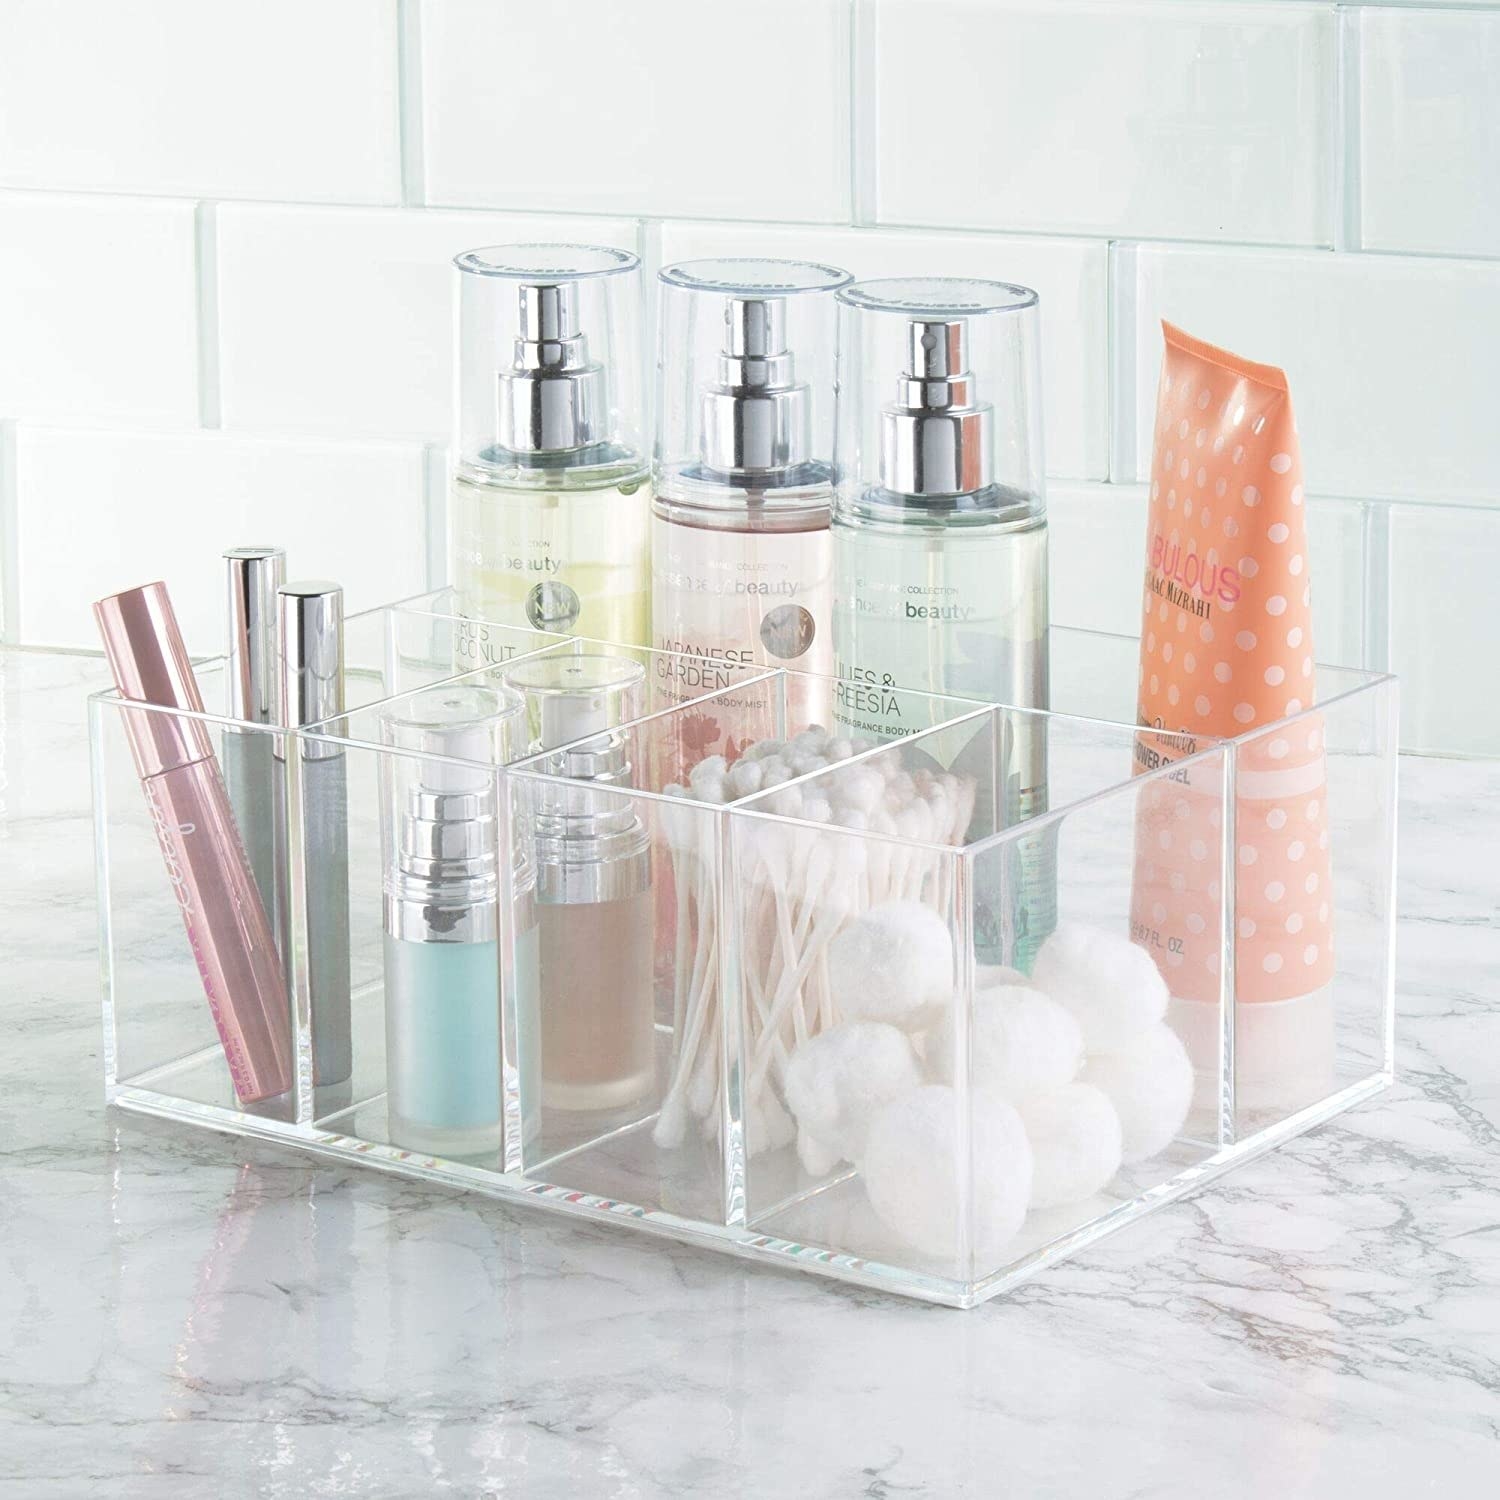 a divided container with toiletries in each compartment